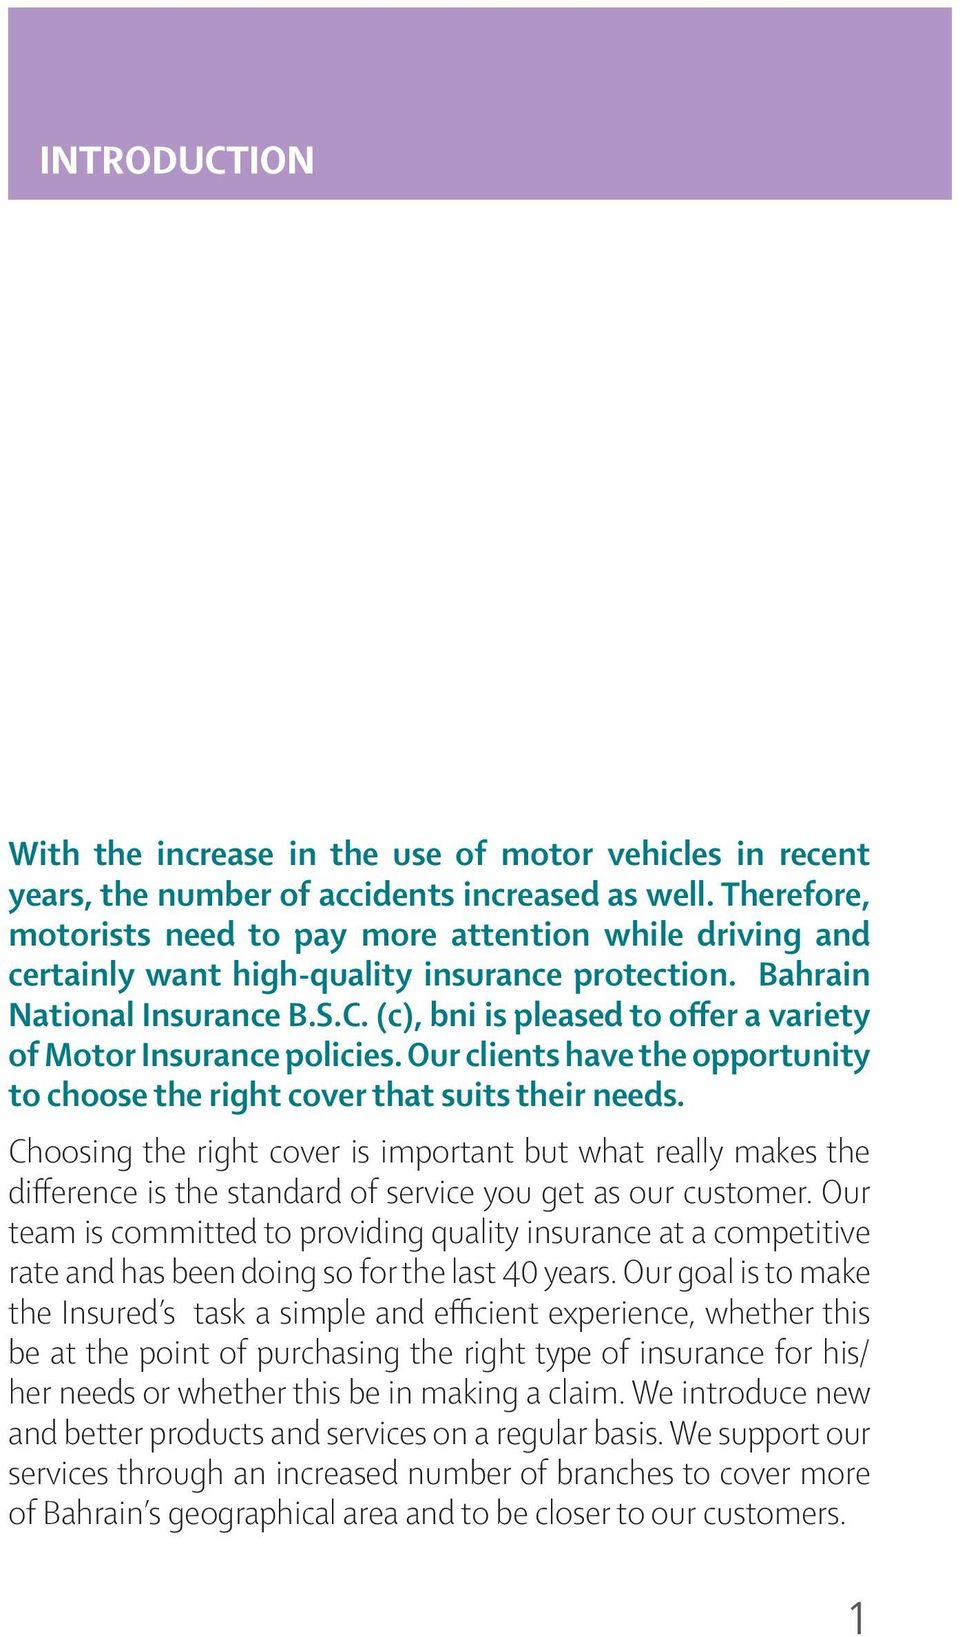 (c), bni is pleased to offer a variety of Motor Insurance policies. Our clients have the opportunity to choose the right cover that suits their needs.